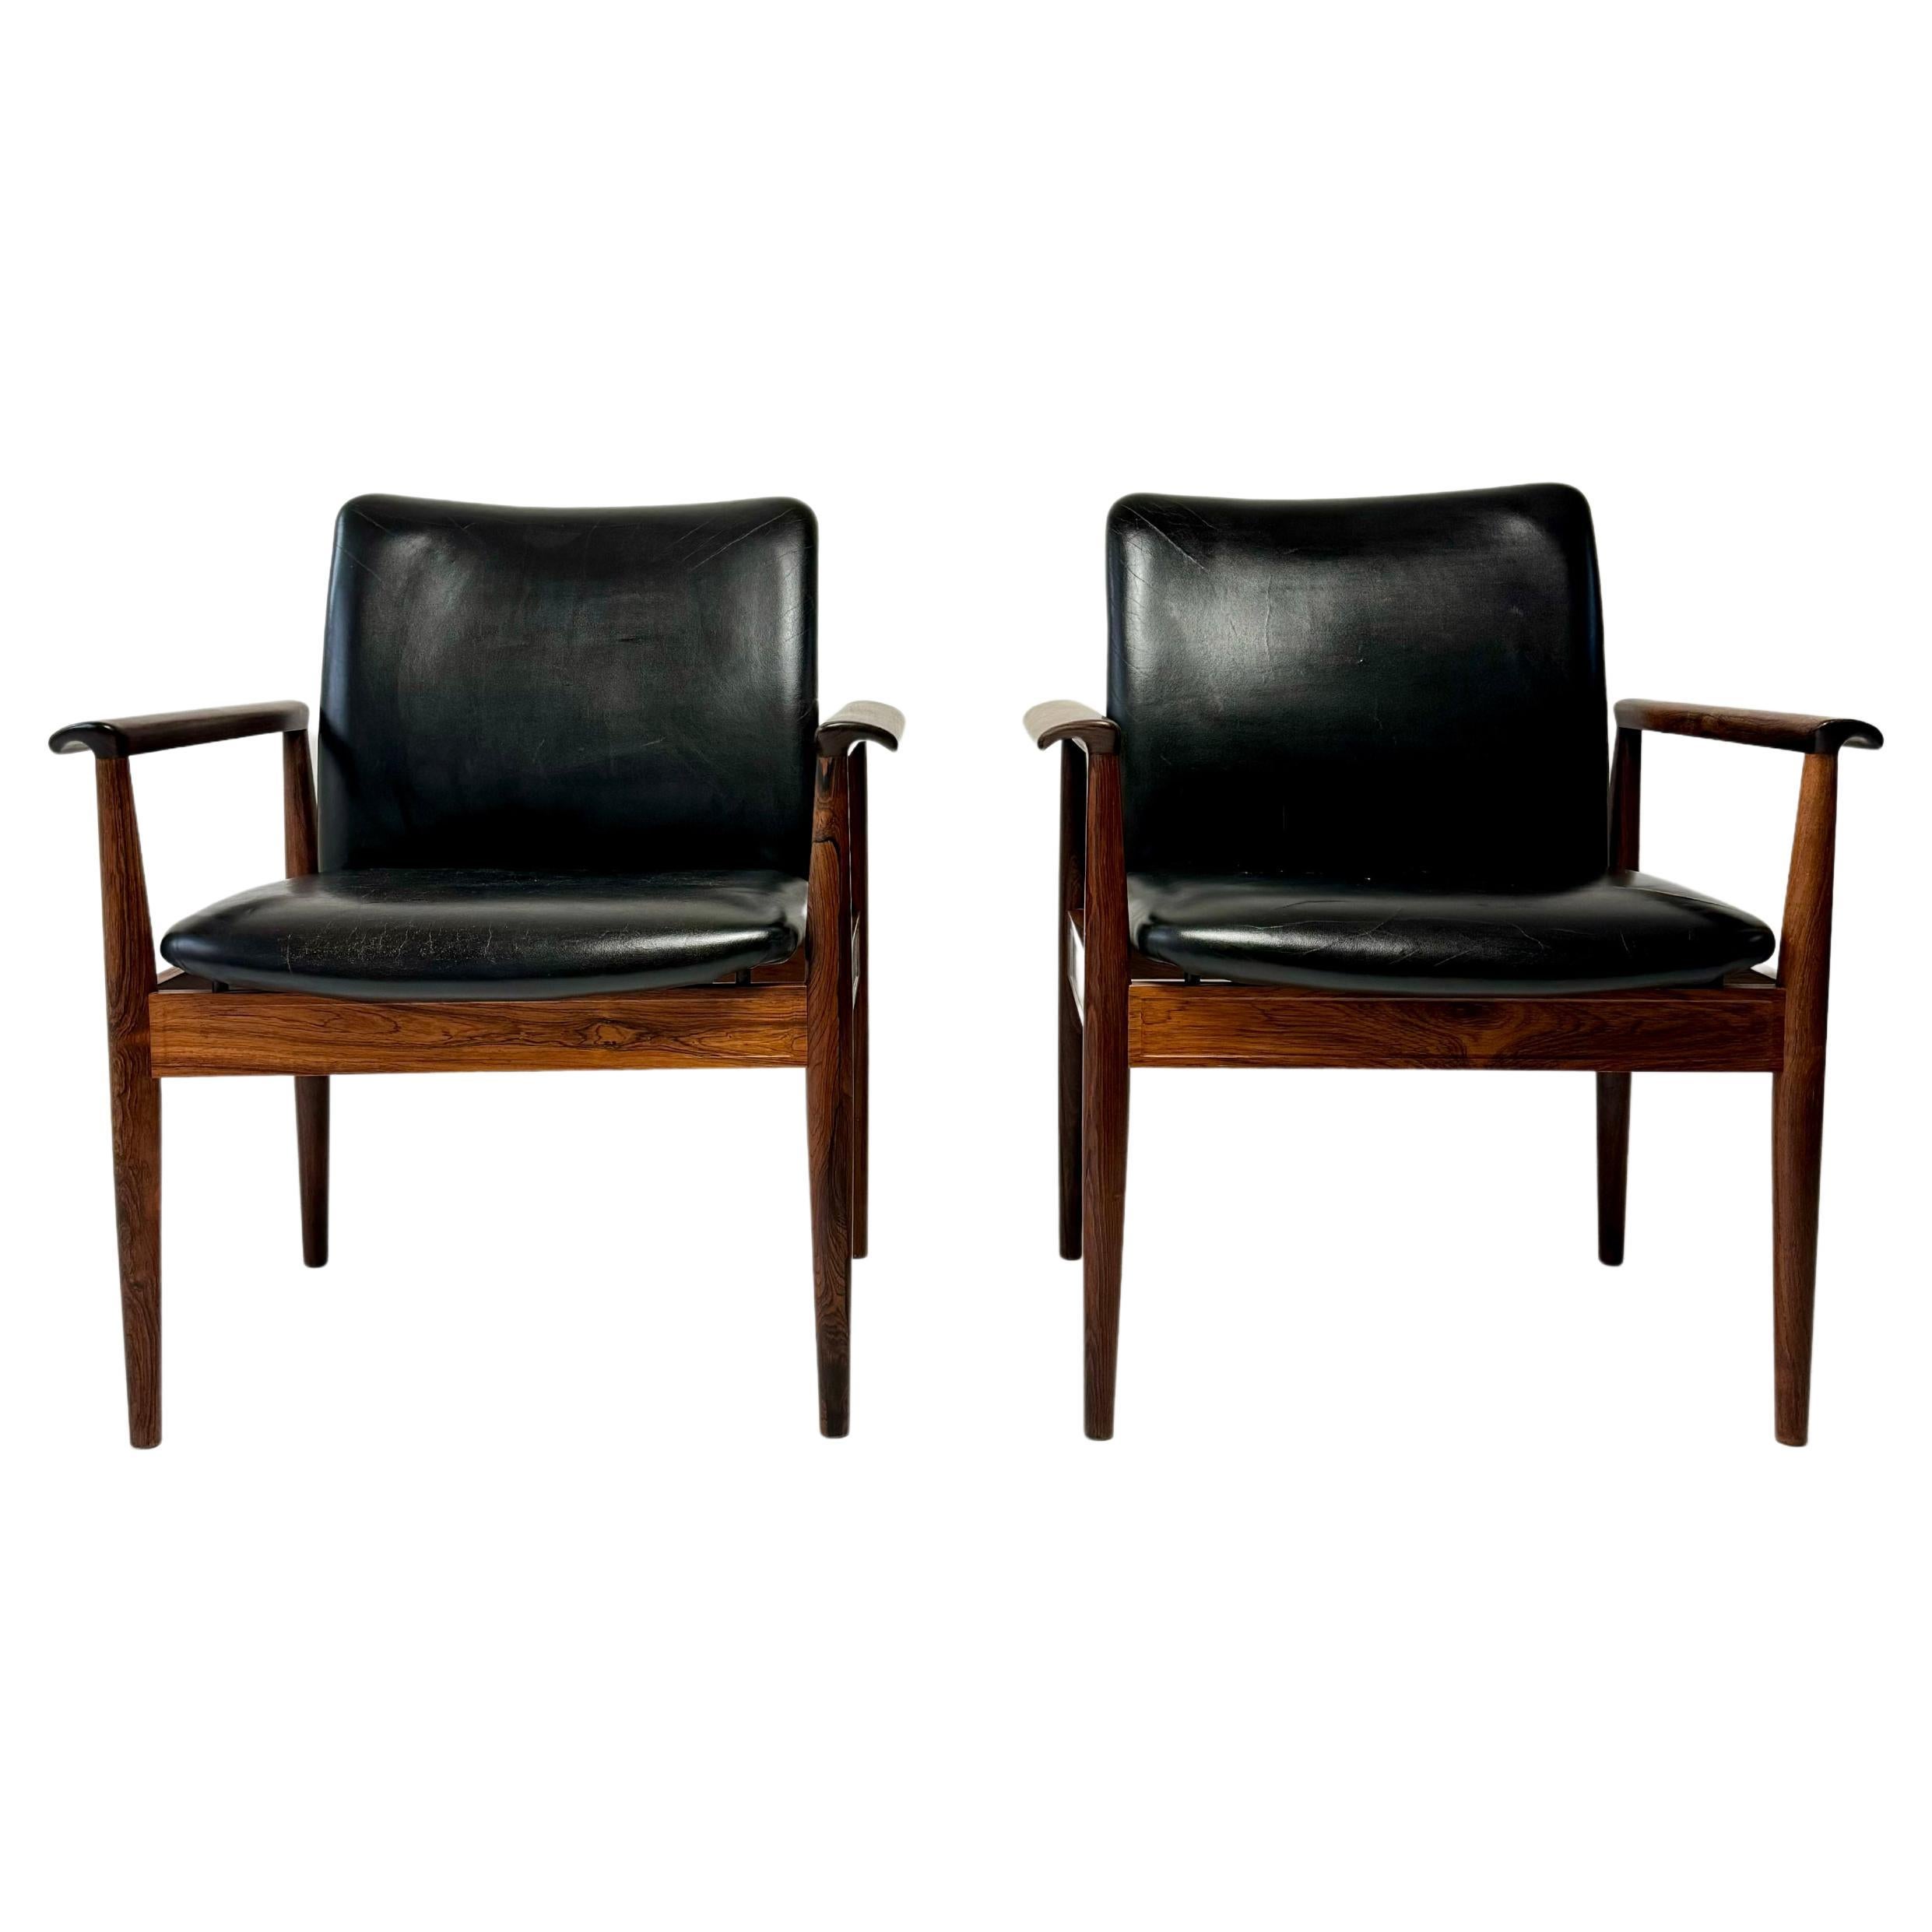 A Set of Diplomat Chairs in Rosewood and Leather by Finn Juhl, Denmark c. 1960's